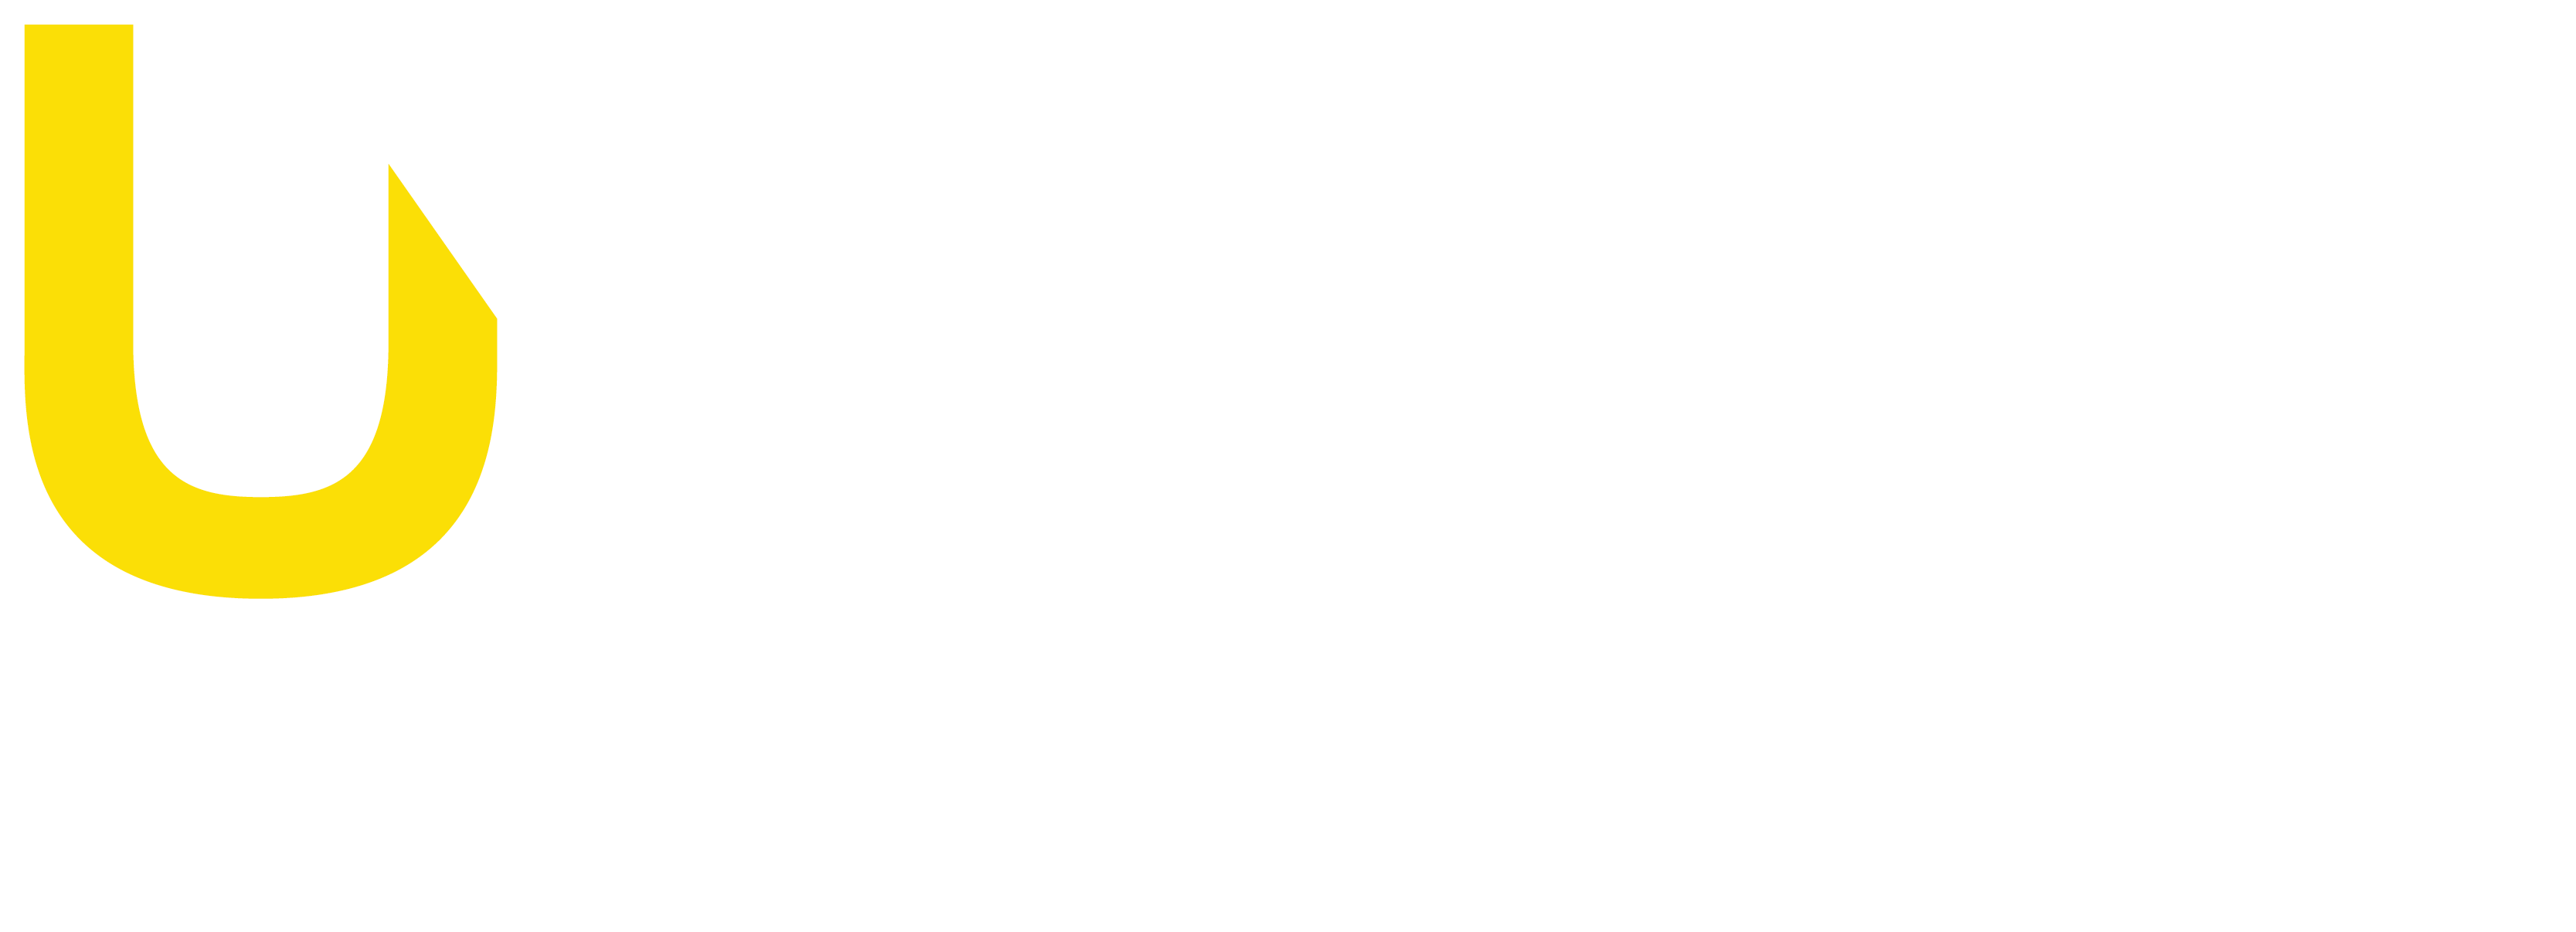 Company logo for 'United Construction & Forestry - Pembroke'.